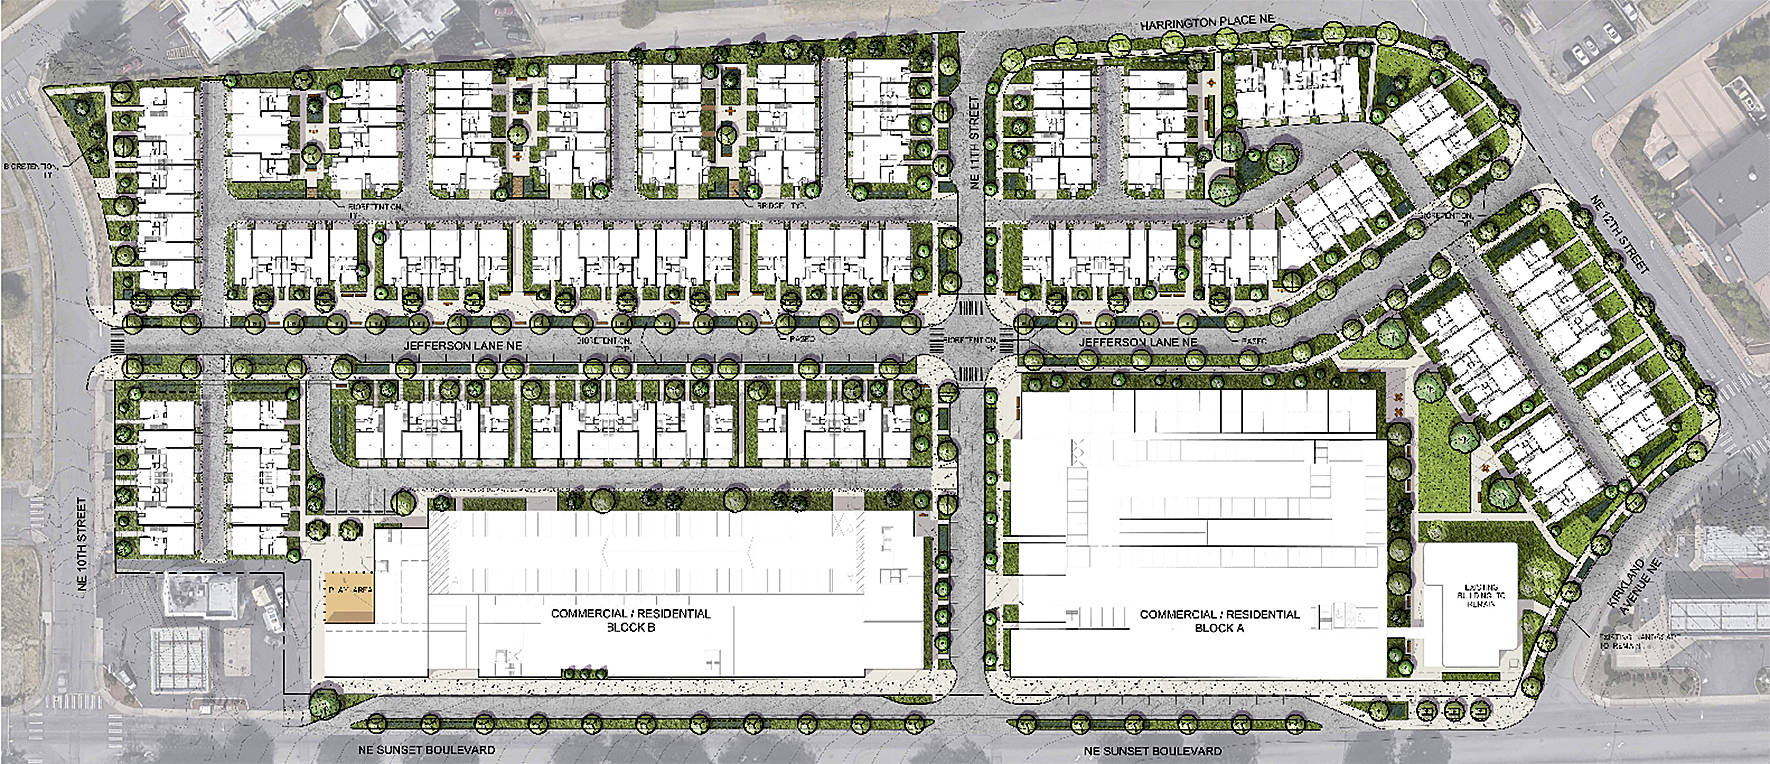 Courtesy of the city of Renton                                Renderings of the proposed plan for the Greater Hi-Lands Shopping Center.